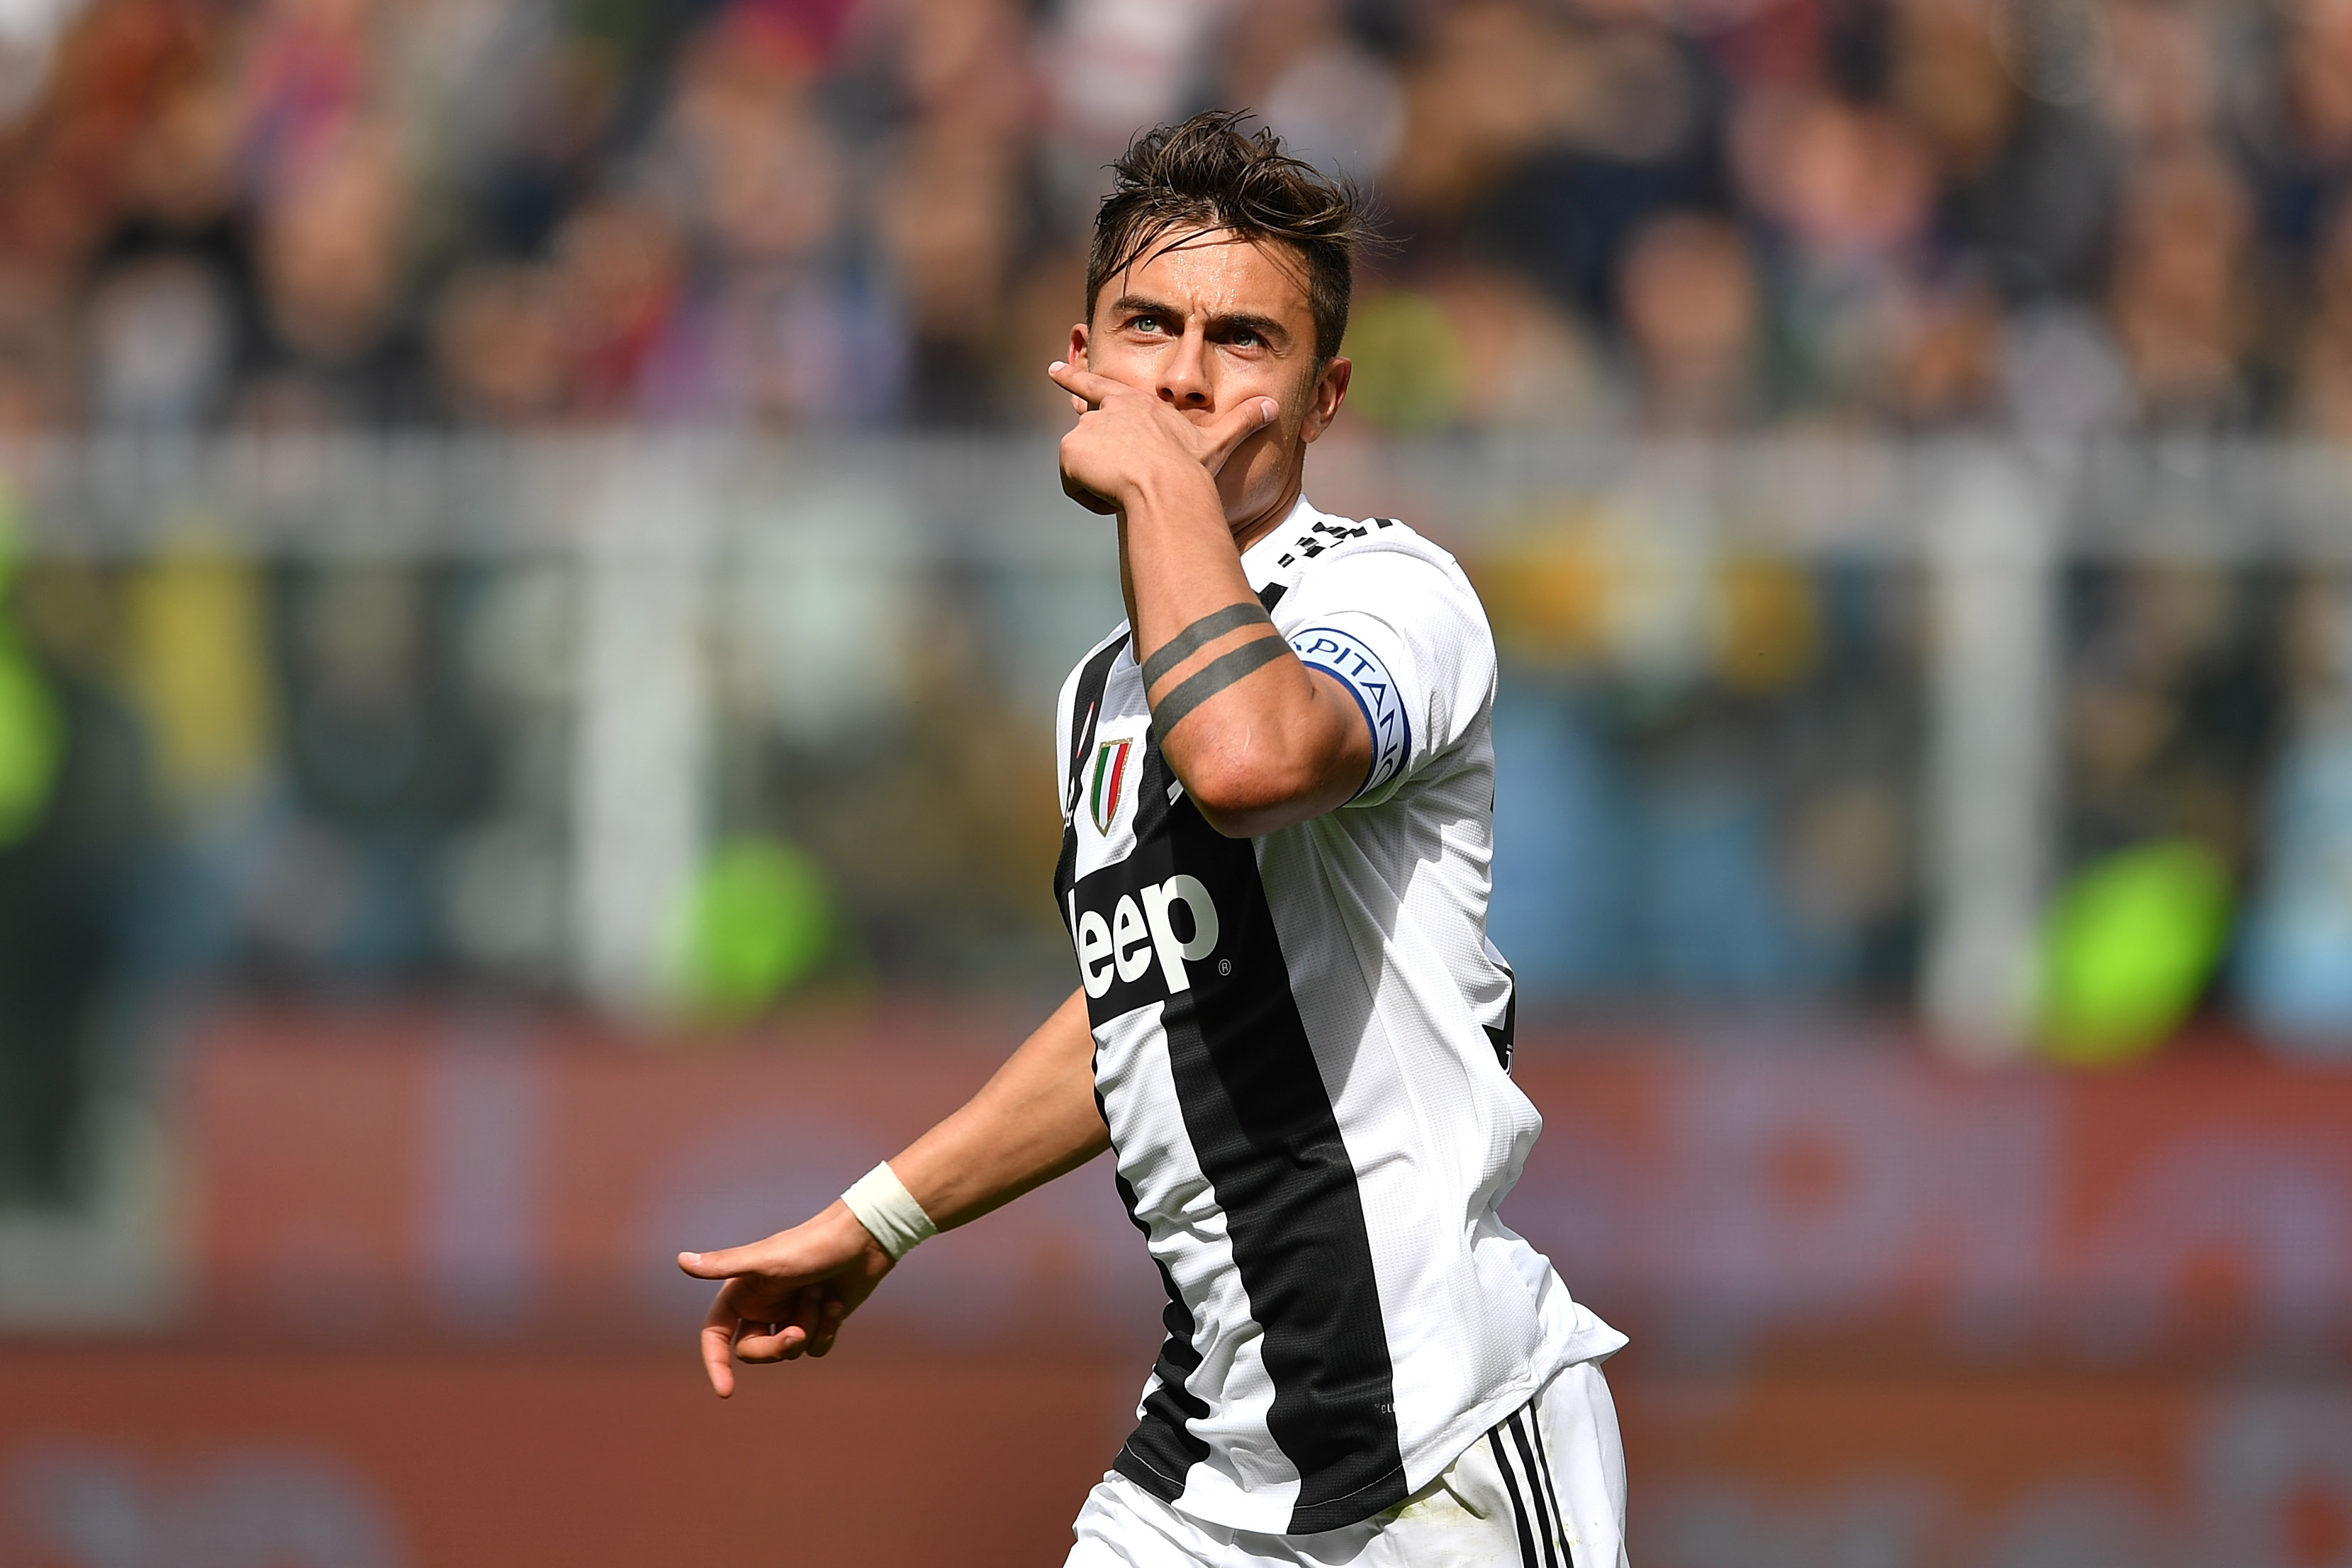 GENOA, ITALY - MARCH 17:  Paulo Dybala of Juventus celebrates a goal canceled during the Serie A match between Genoa CFC and Juventus at Stadio Luigi Ferraris on March 17, 2019 in Genoa, Italy.  (Photo by Valerio Pennicino/Getty Images)